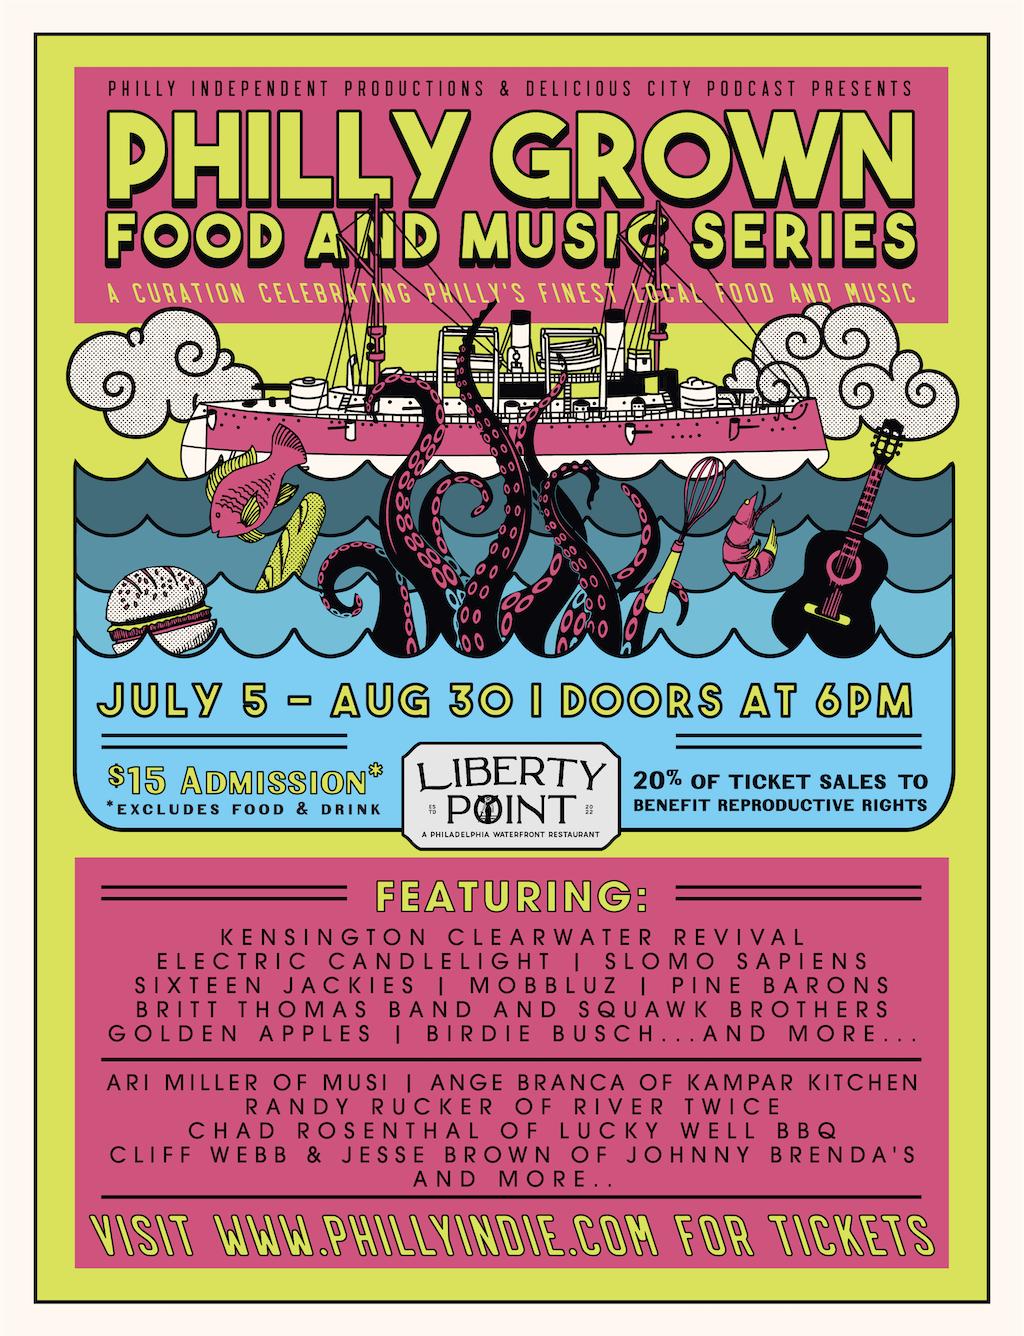 Philly Grown Food and Music